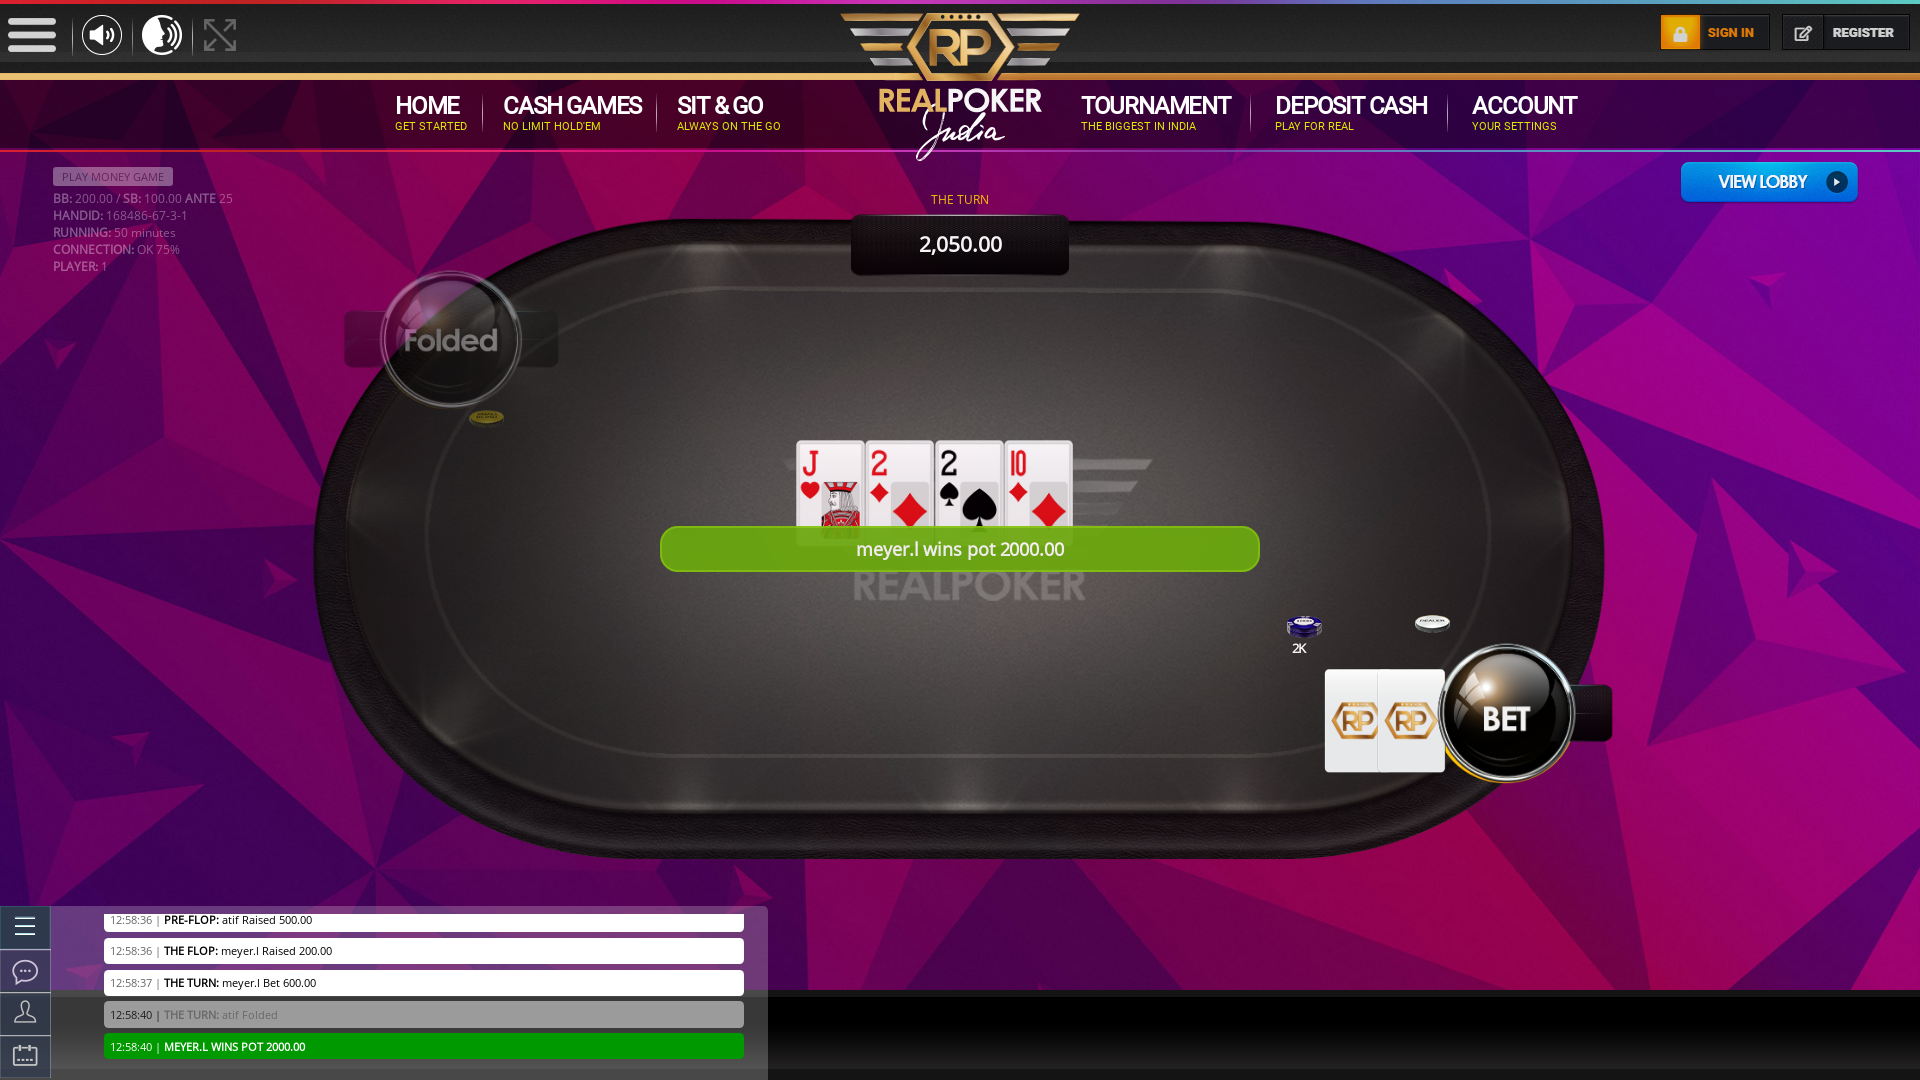 Real Indian poker on a 10 player table in the 49th minute of the game